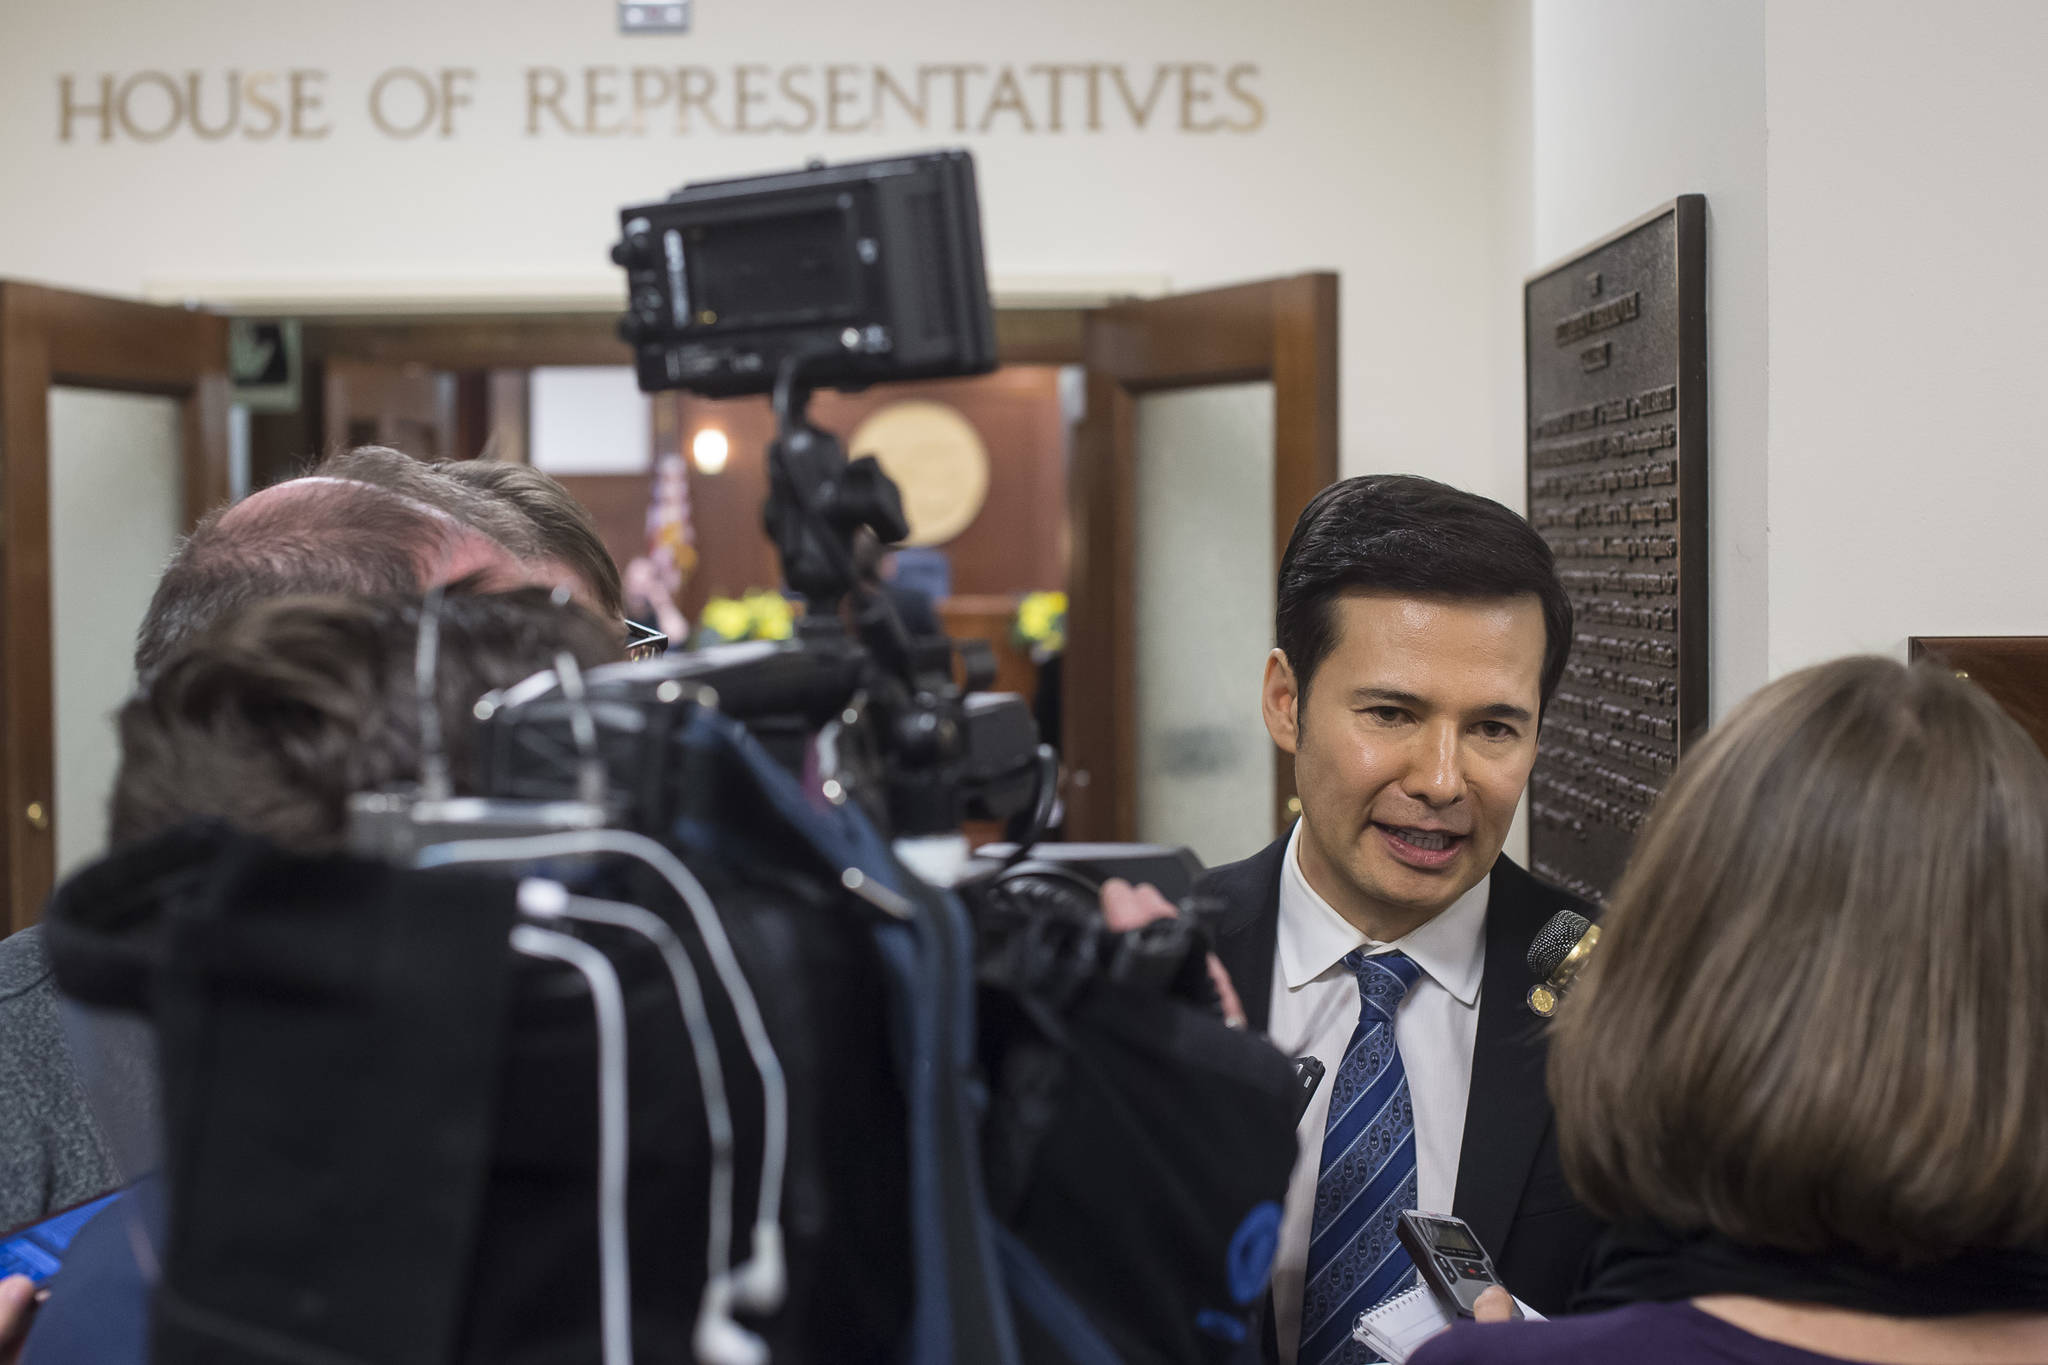 Rep. Neal Foster, D-Nome, is interviewed by members of the media outside the House of Representatives chamber after being voted as Speaker Pro Tempore by House members at the Capitol on Thursday, Jan. 17, 2019. (Michael Penn | Juneau Empire)